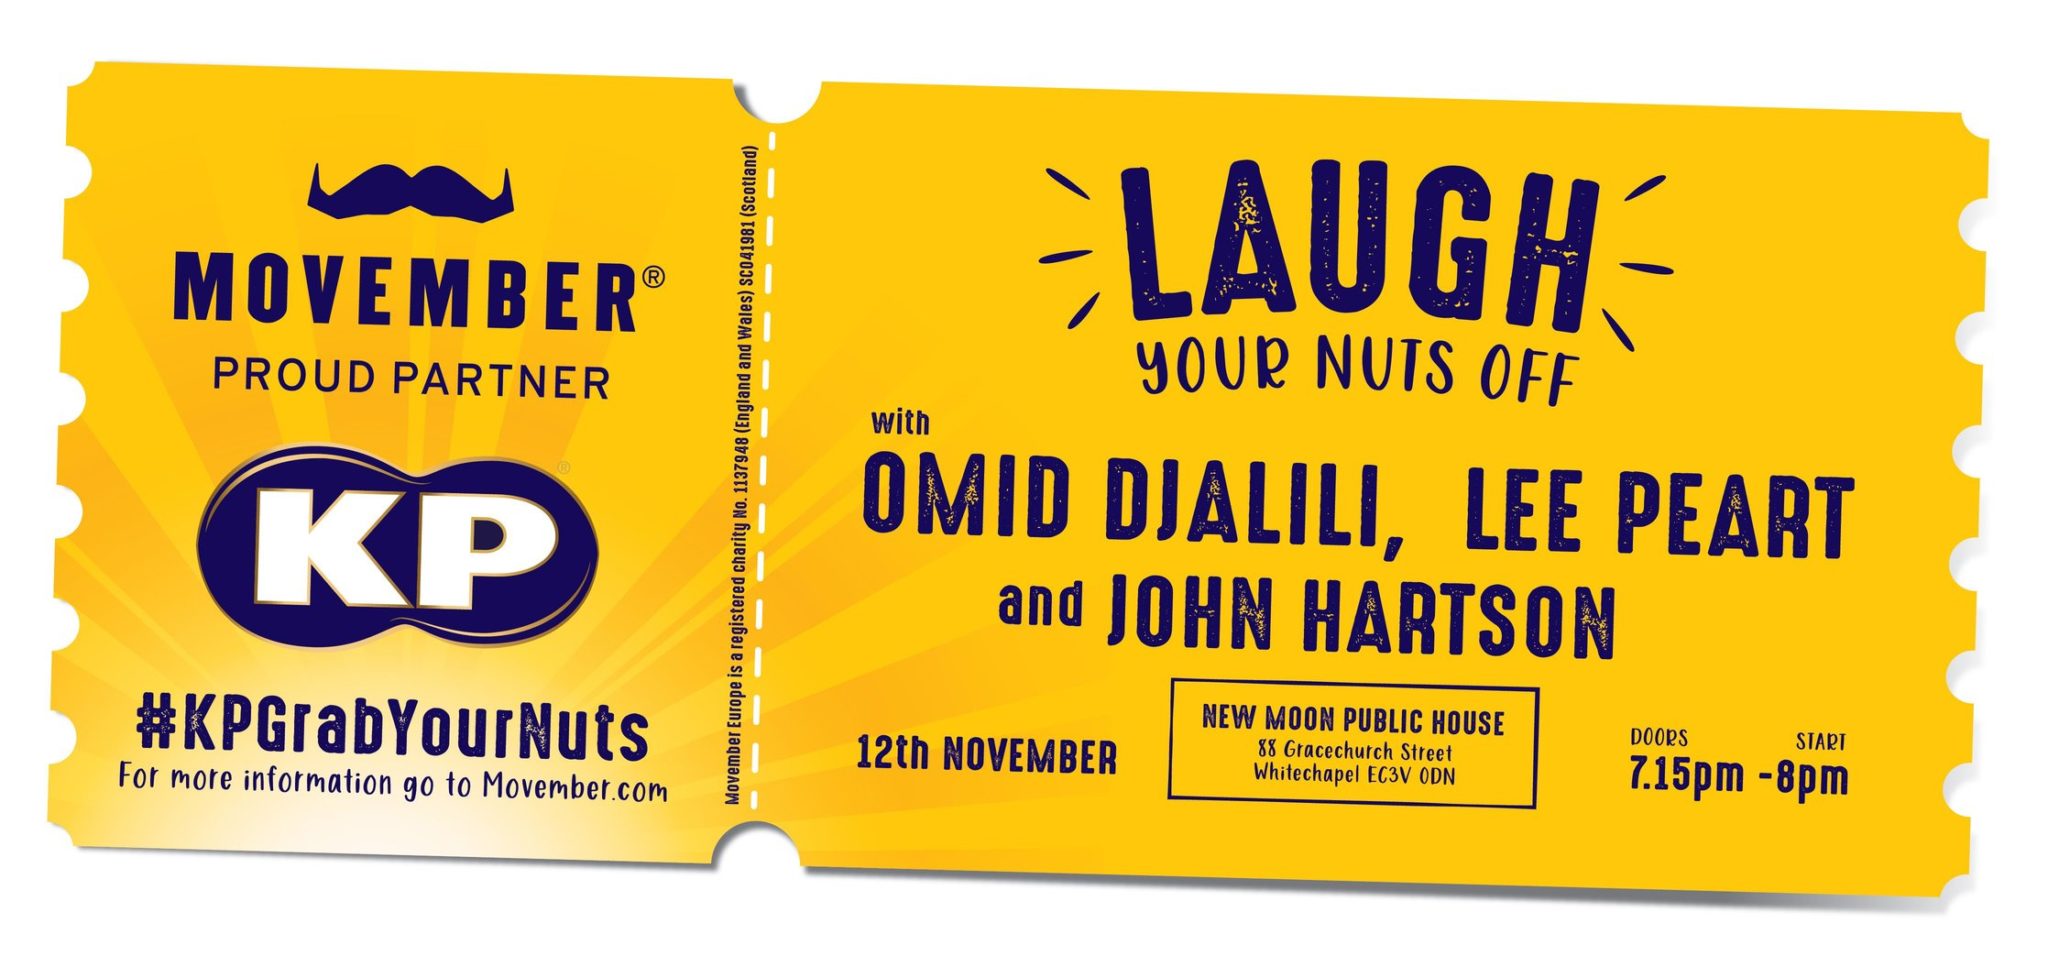 KP Snacks partners with Movember to get men to check their nuts